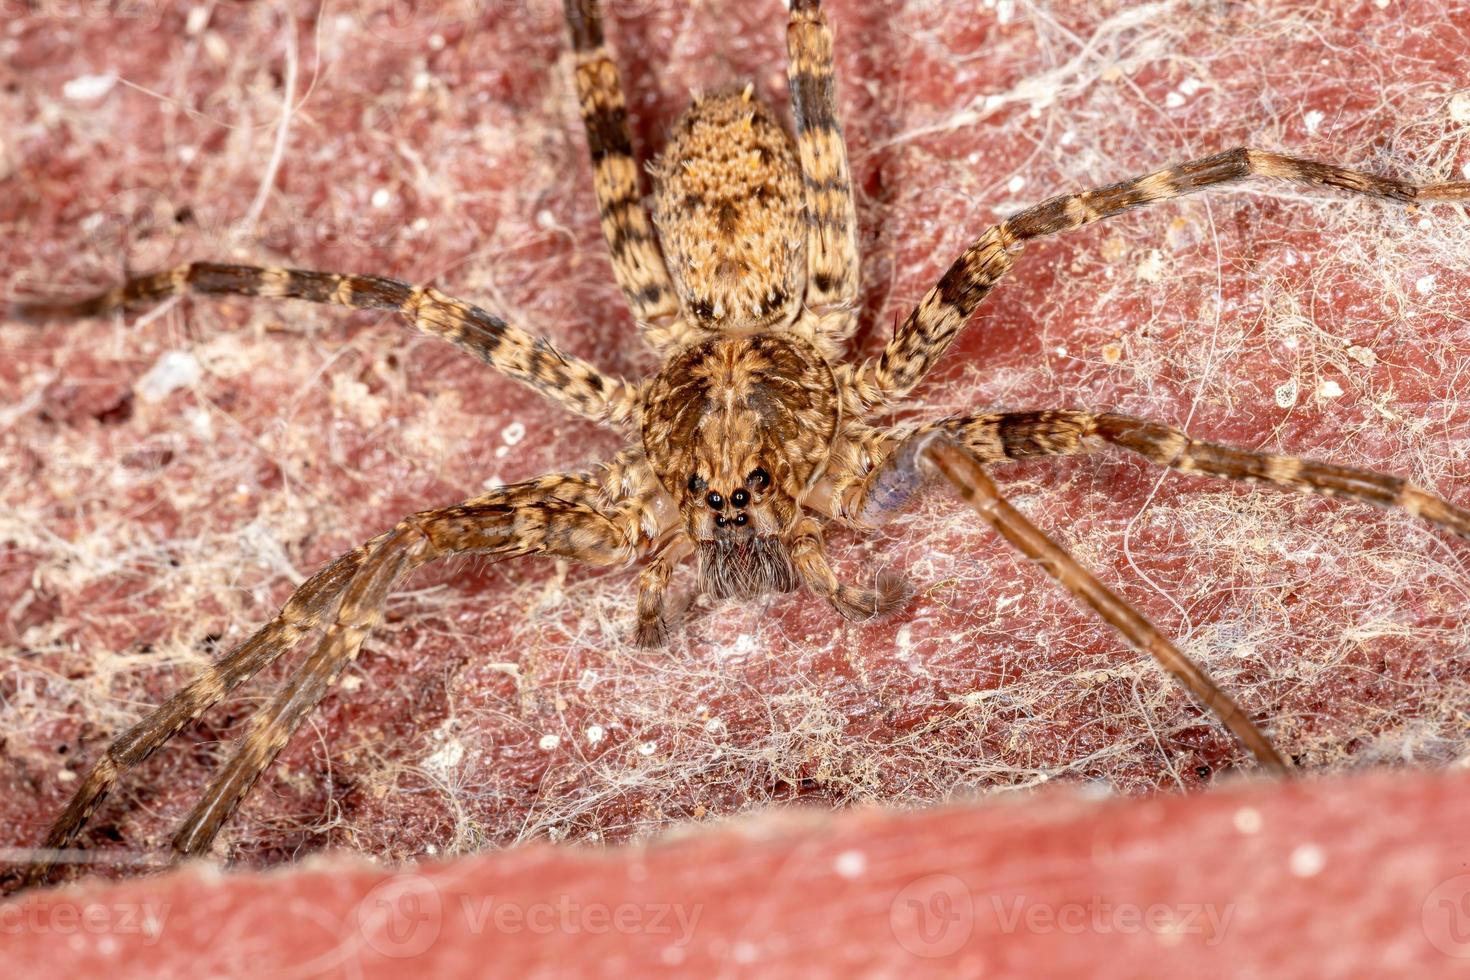 Adult Wandering Spider photo